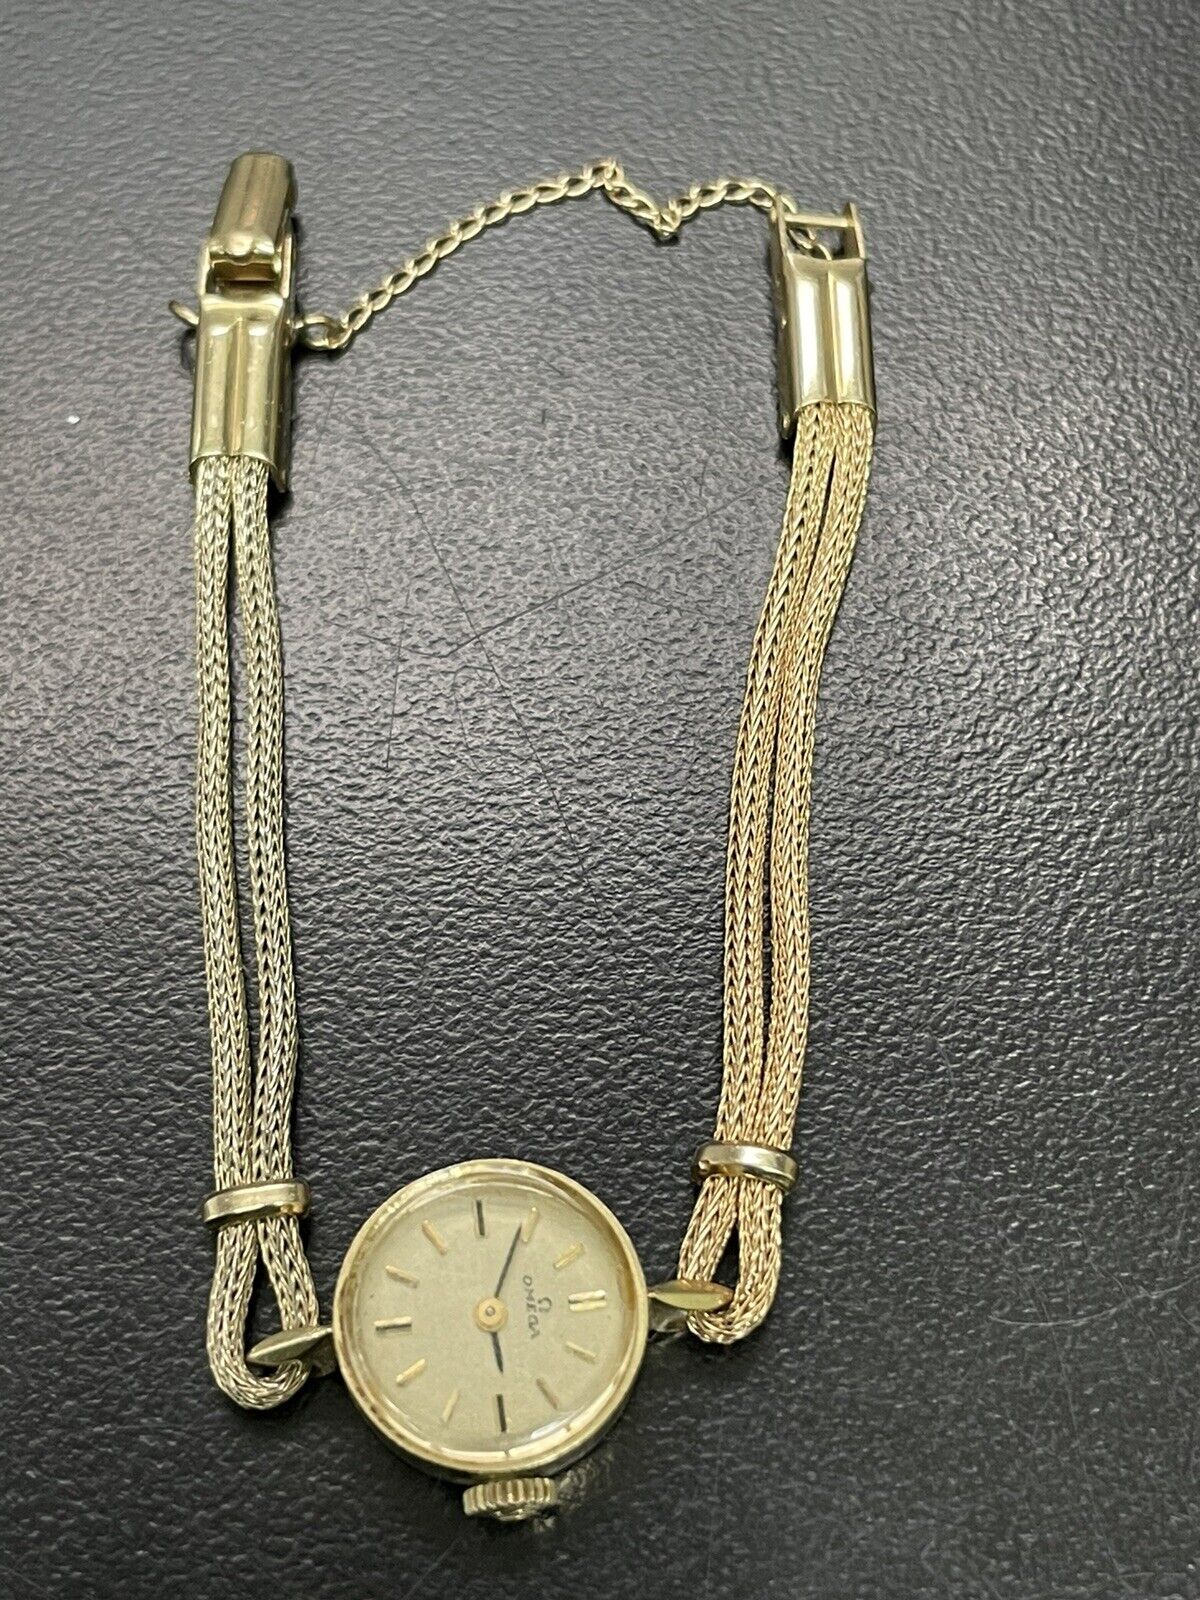 VINTAGE OMEGA LADIES 14kt WRISTWATCH . 1 GOLD AND 1 SILVER BAN